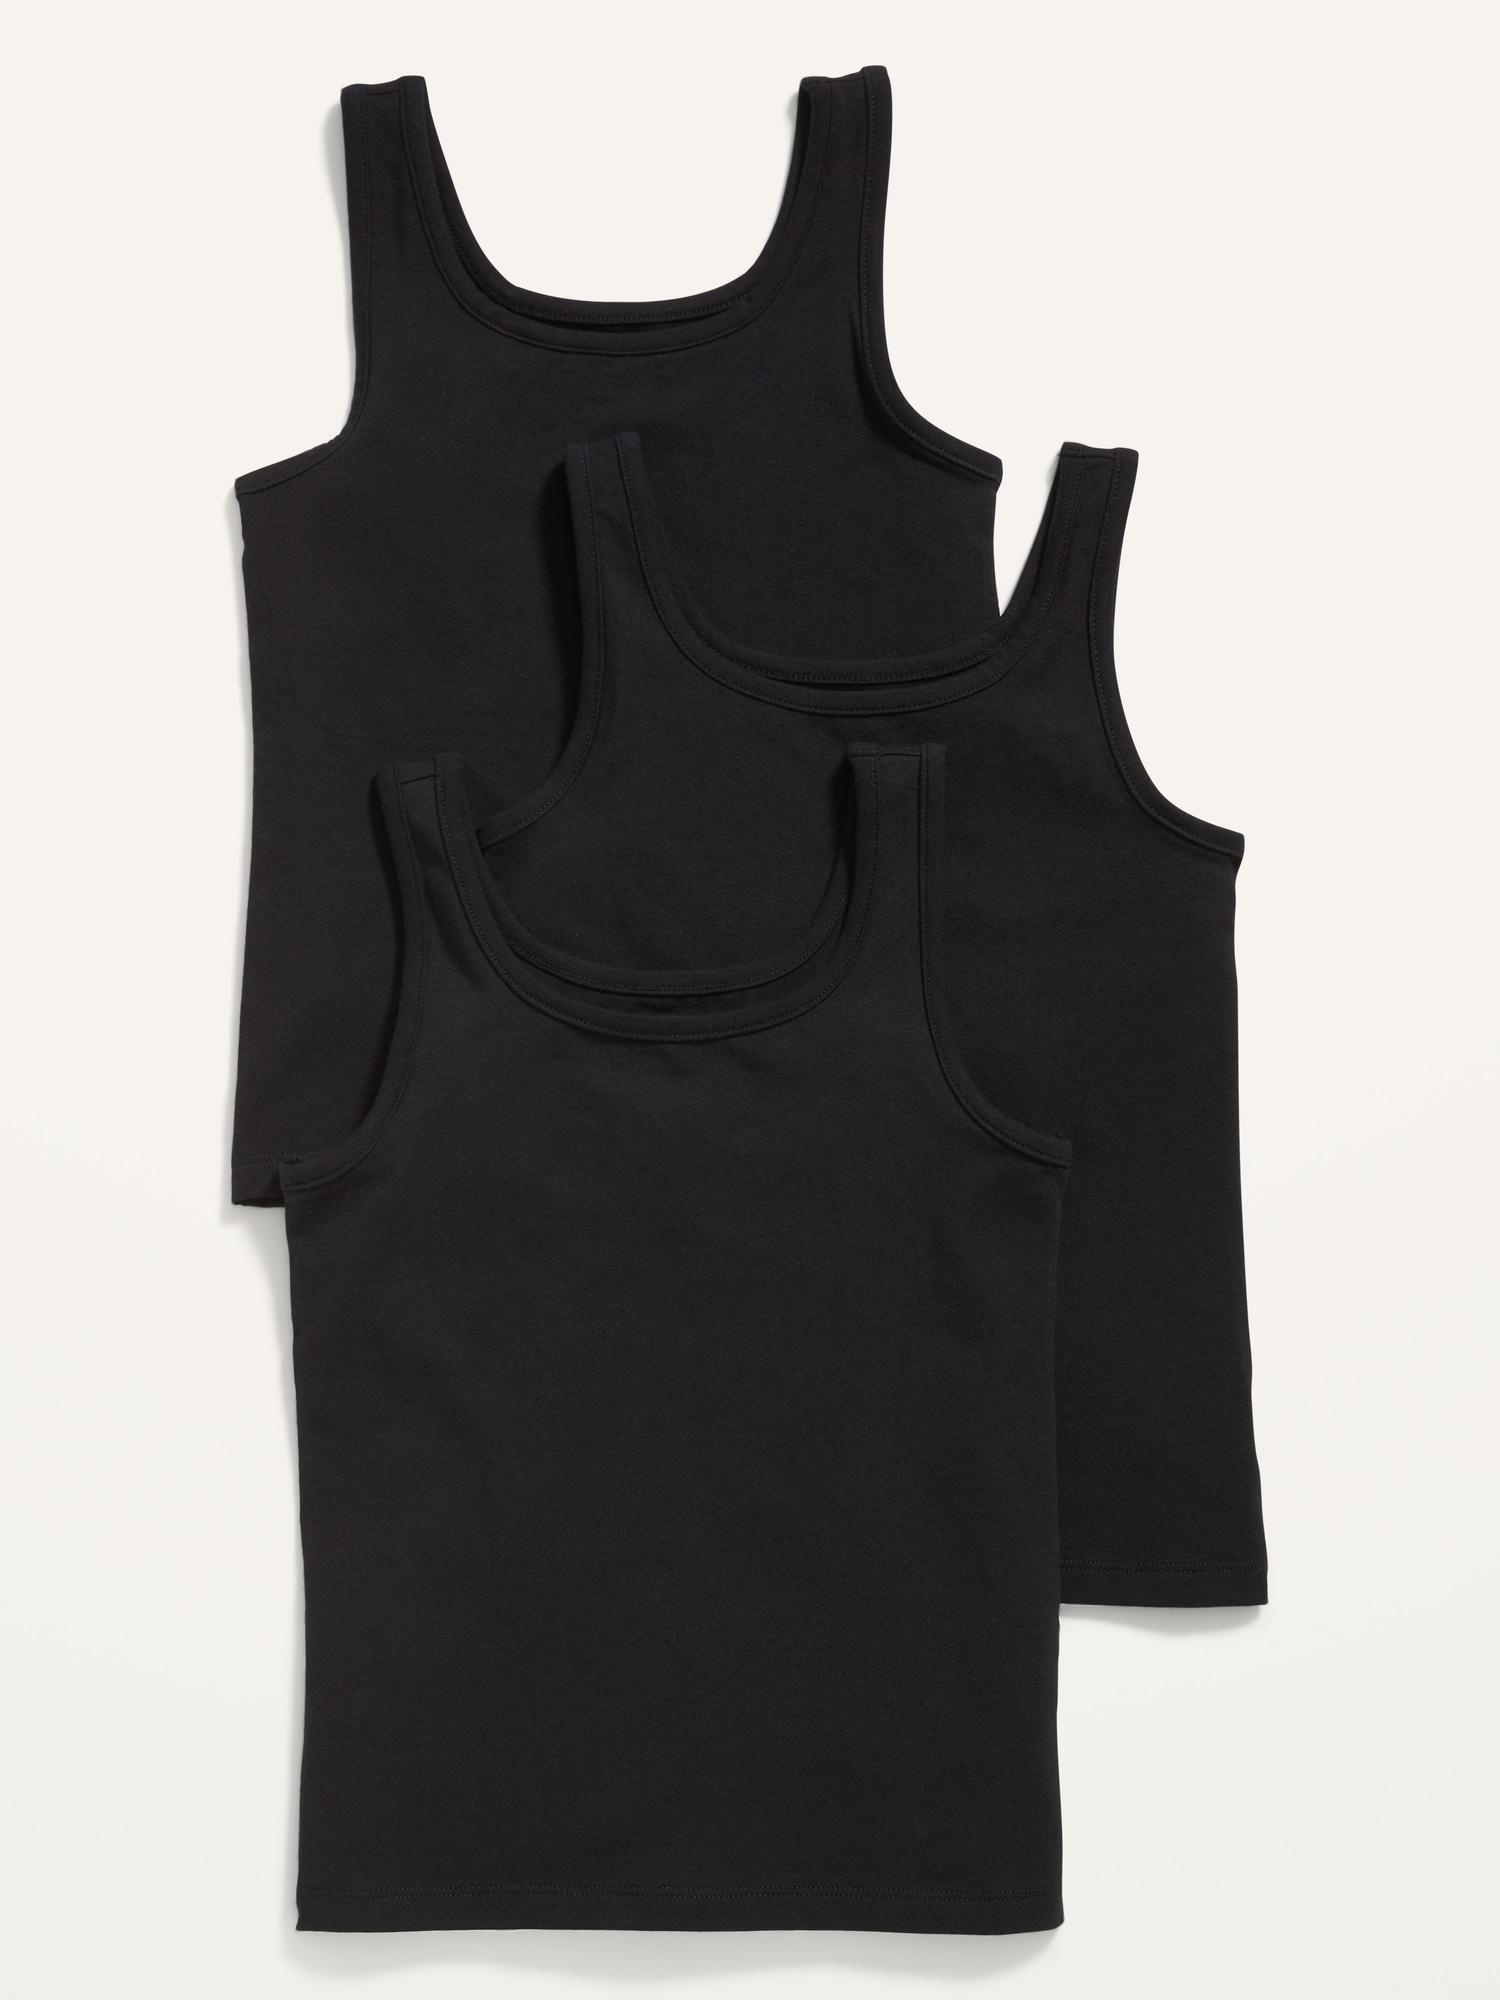 Old Navy Square-Neck Tank Top 3-Pack for Girls black. 1